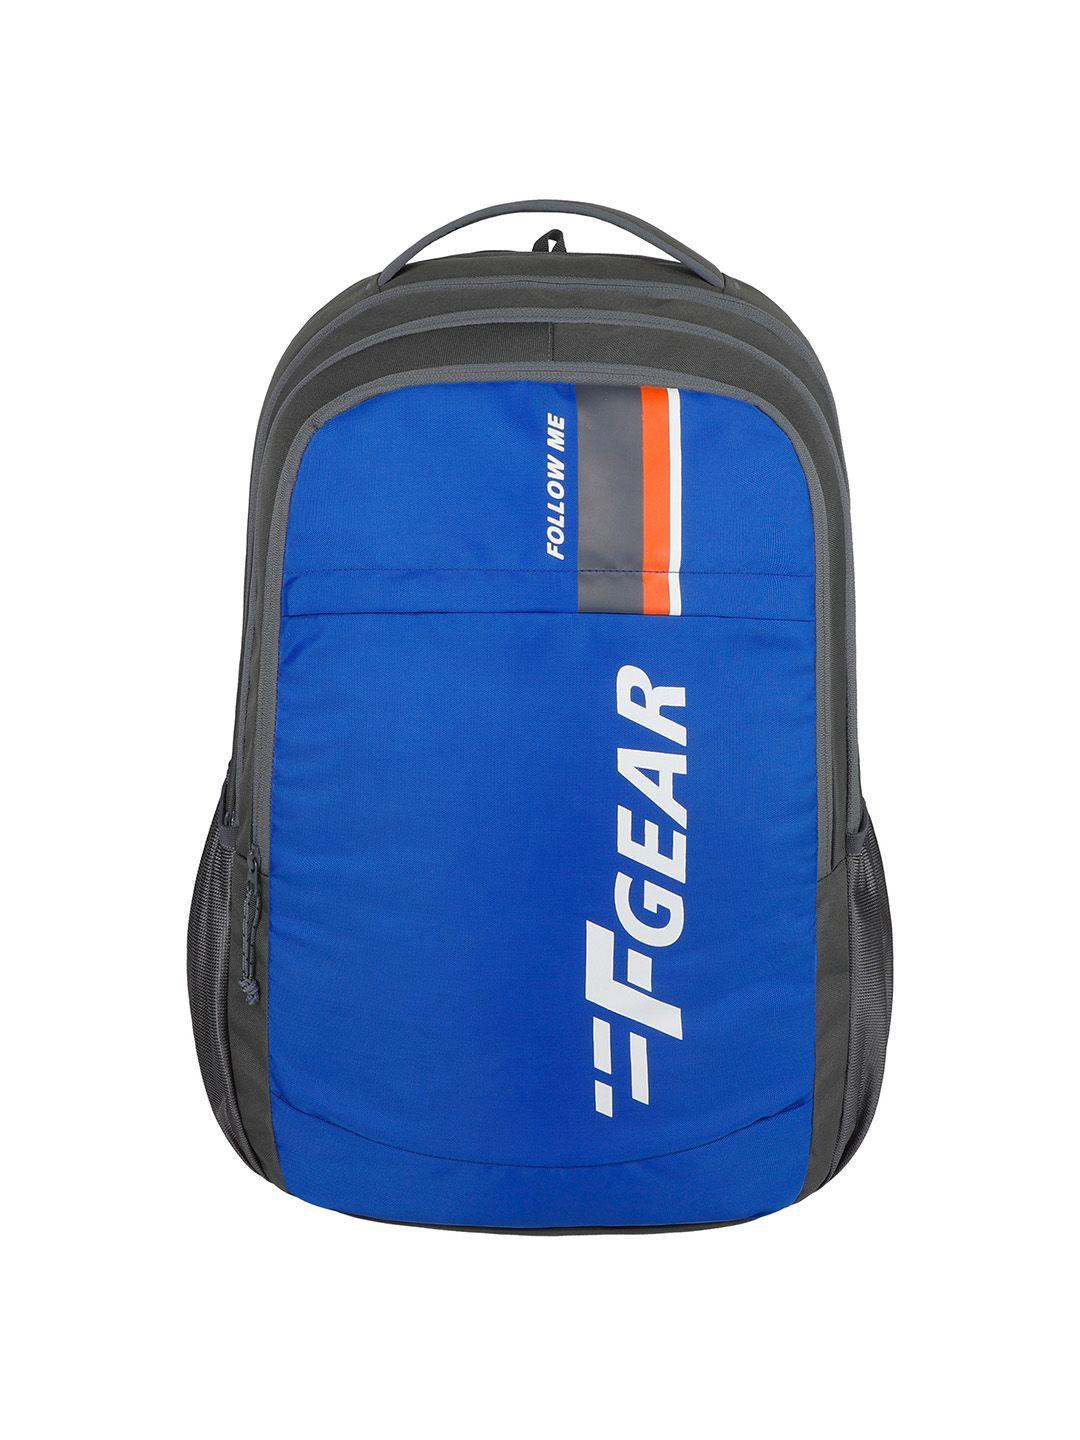 f gear brand logo water resistant backpack